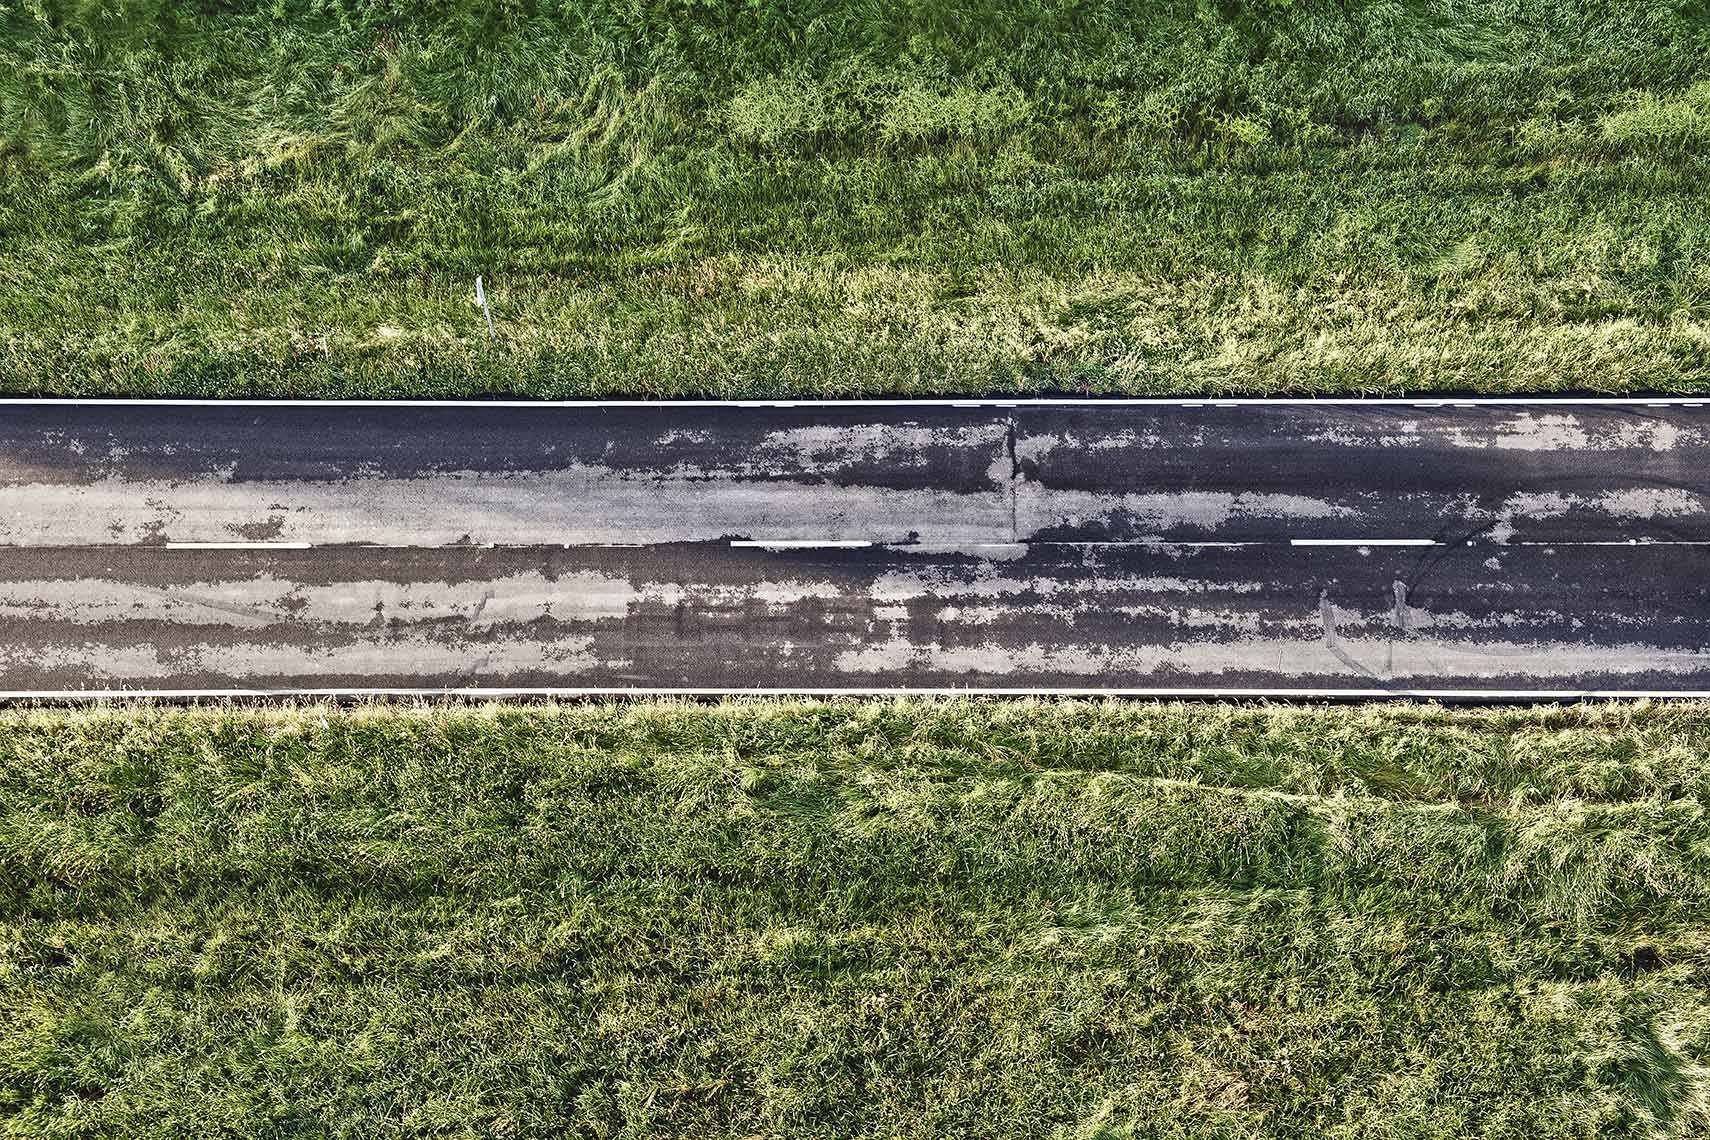 Zoe Wetherall / Aerial Landscape / Road